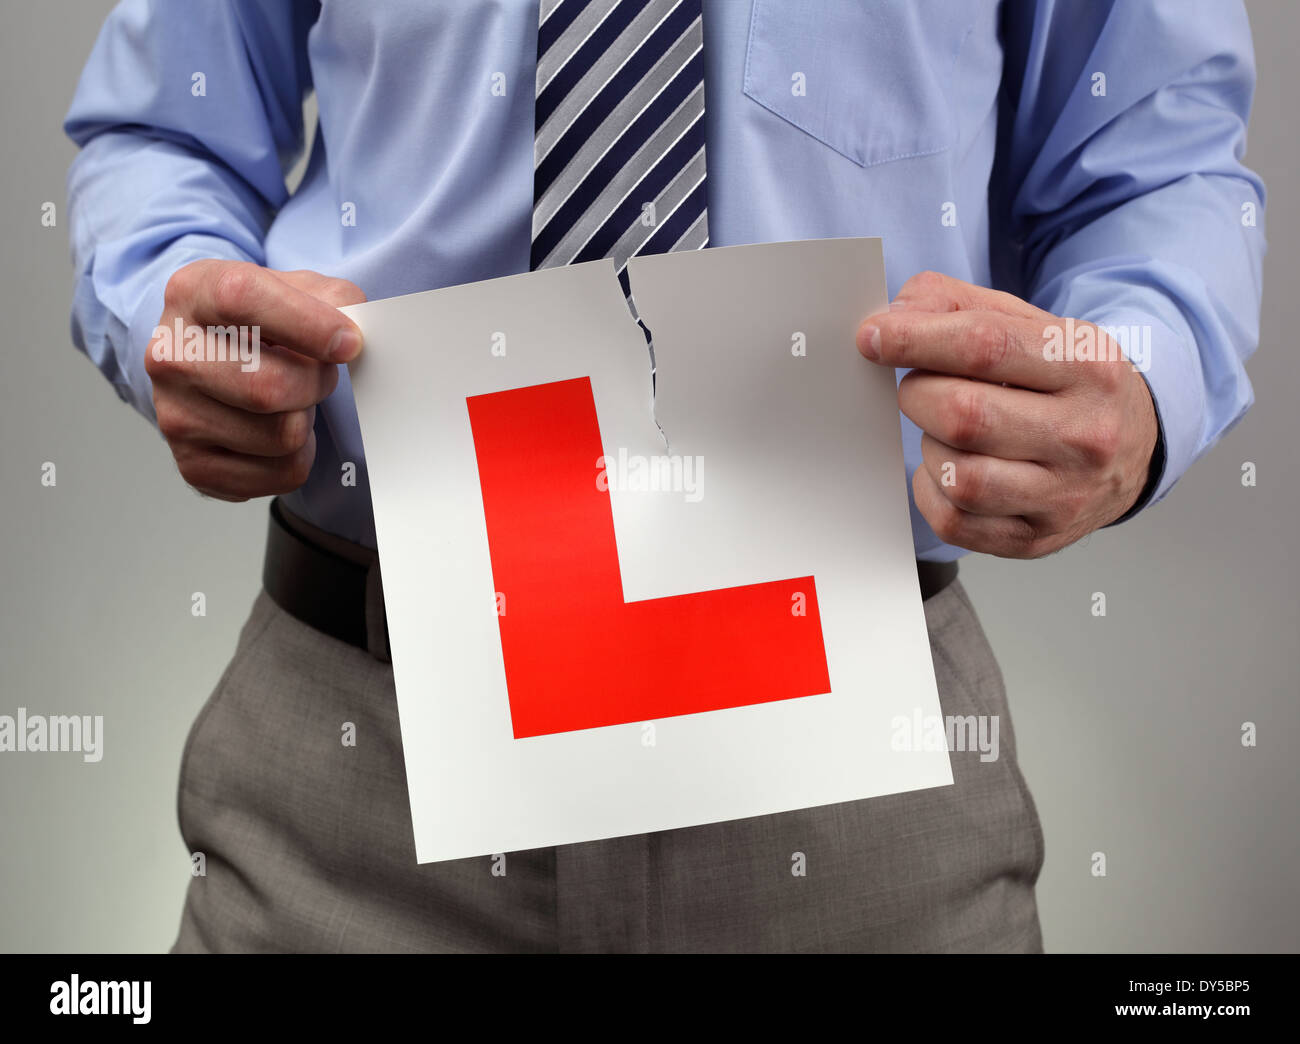 Tearing up L plate Stock Photo